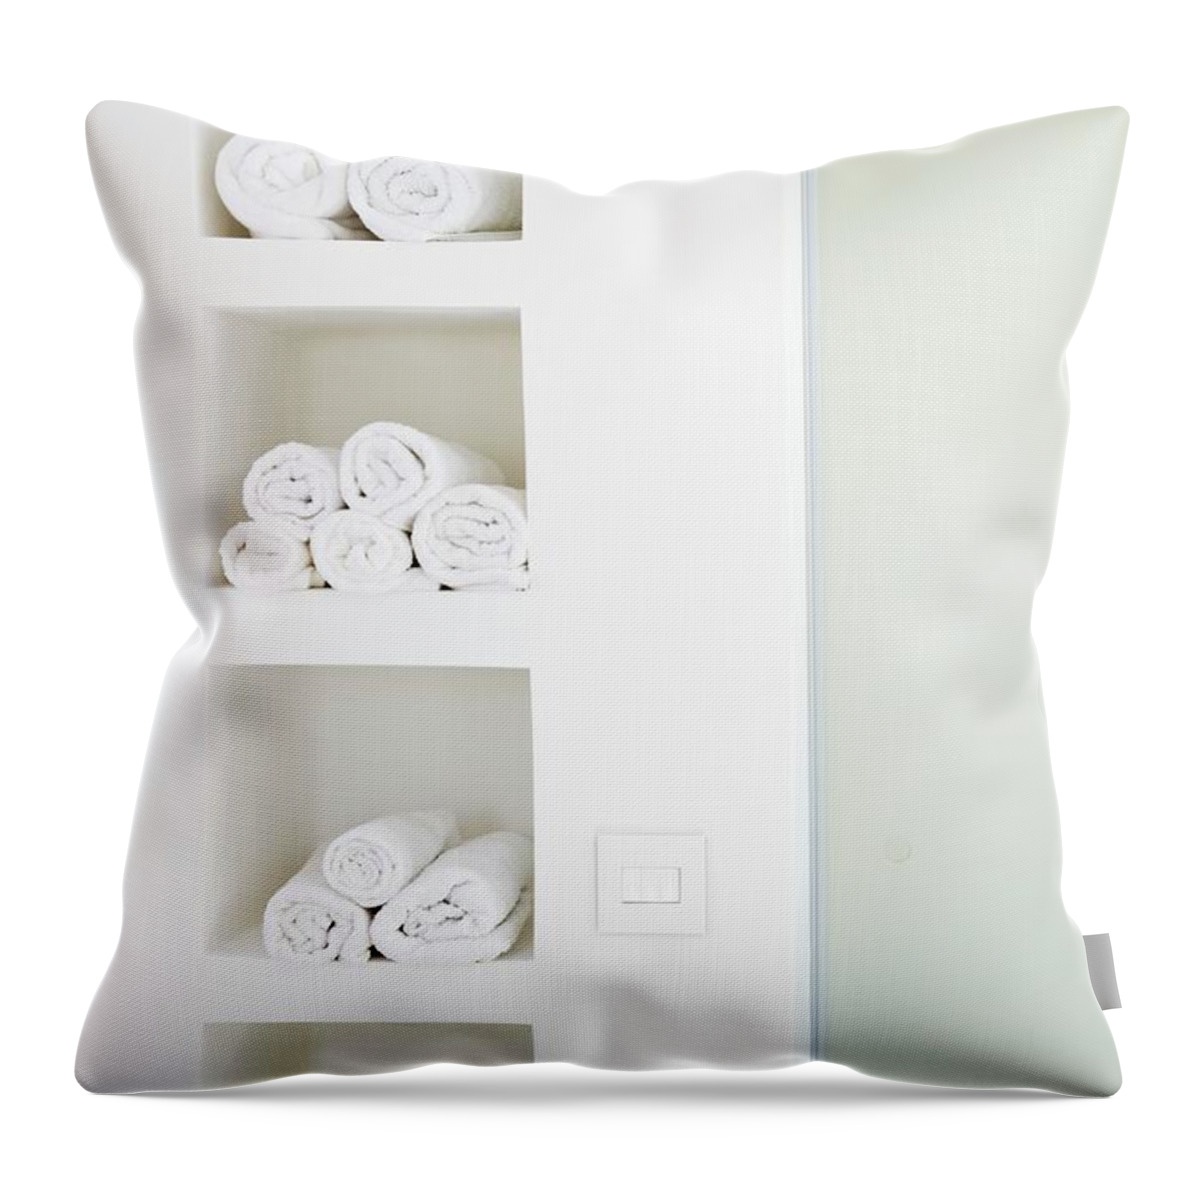 Ip_11183111 Throw Pillow featuring the photograph Rolled, White Towels In Square, White Niches by Simon Scarboro